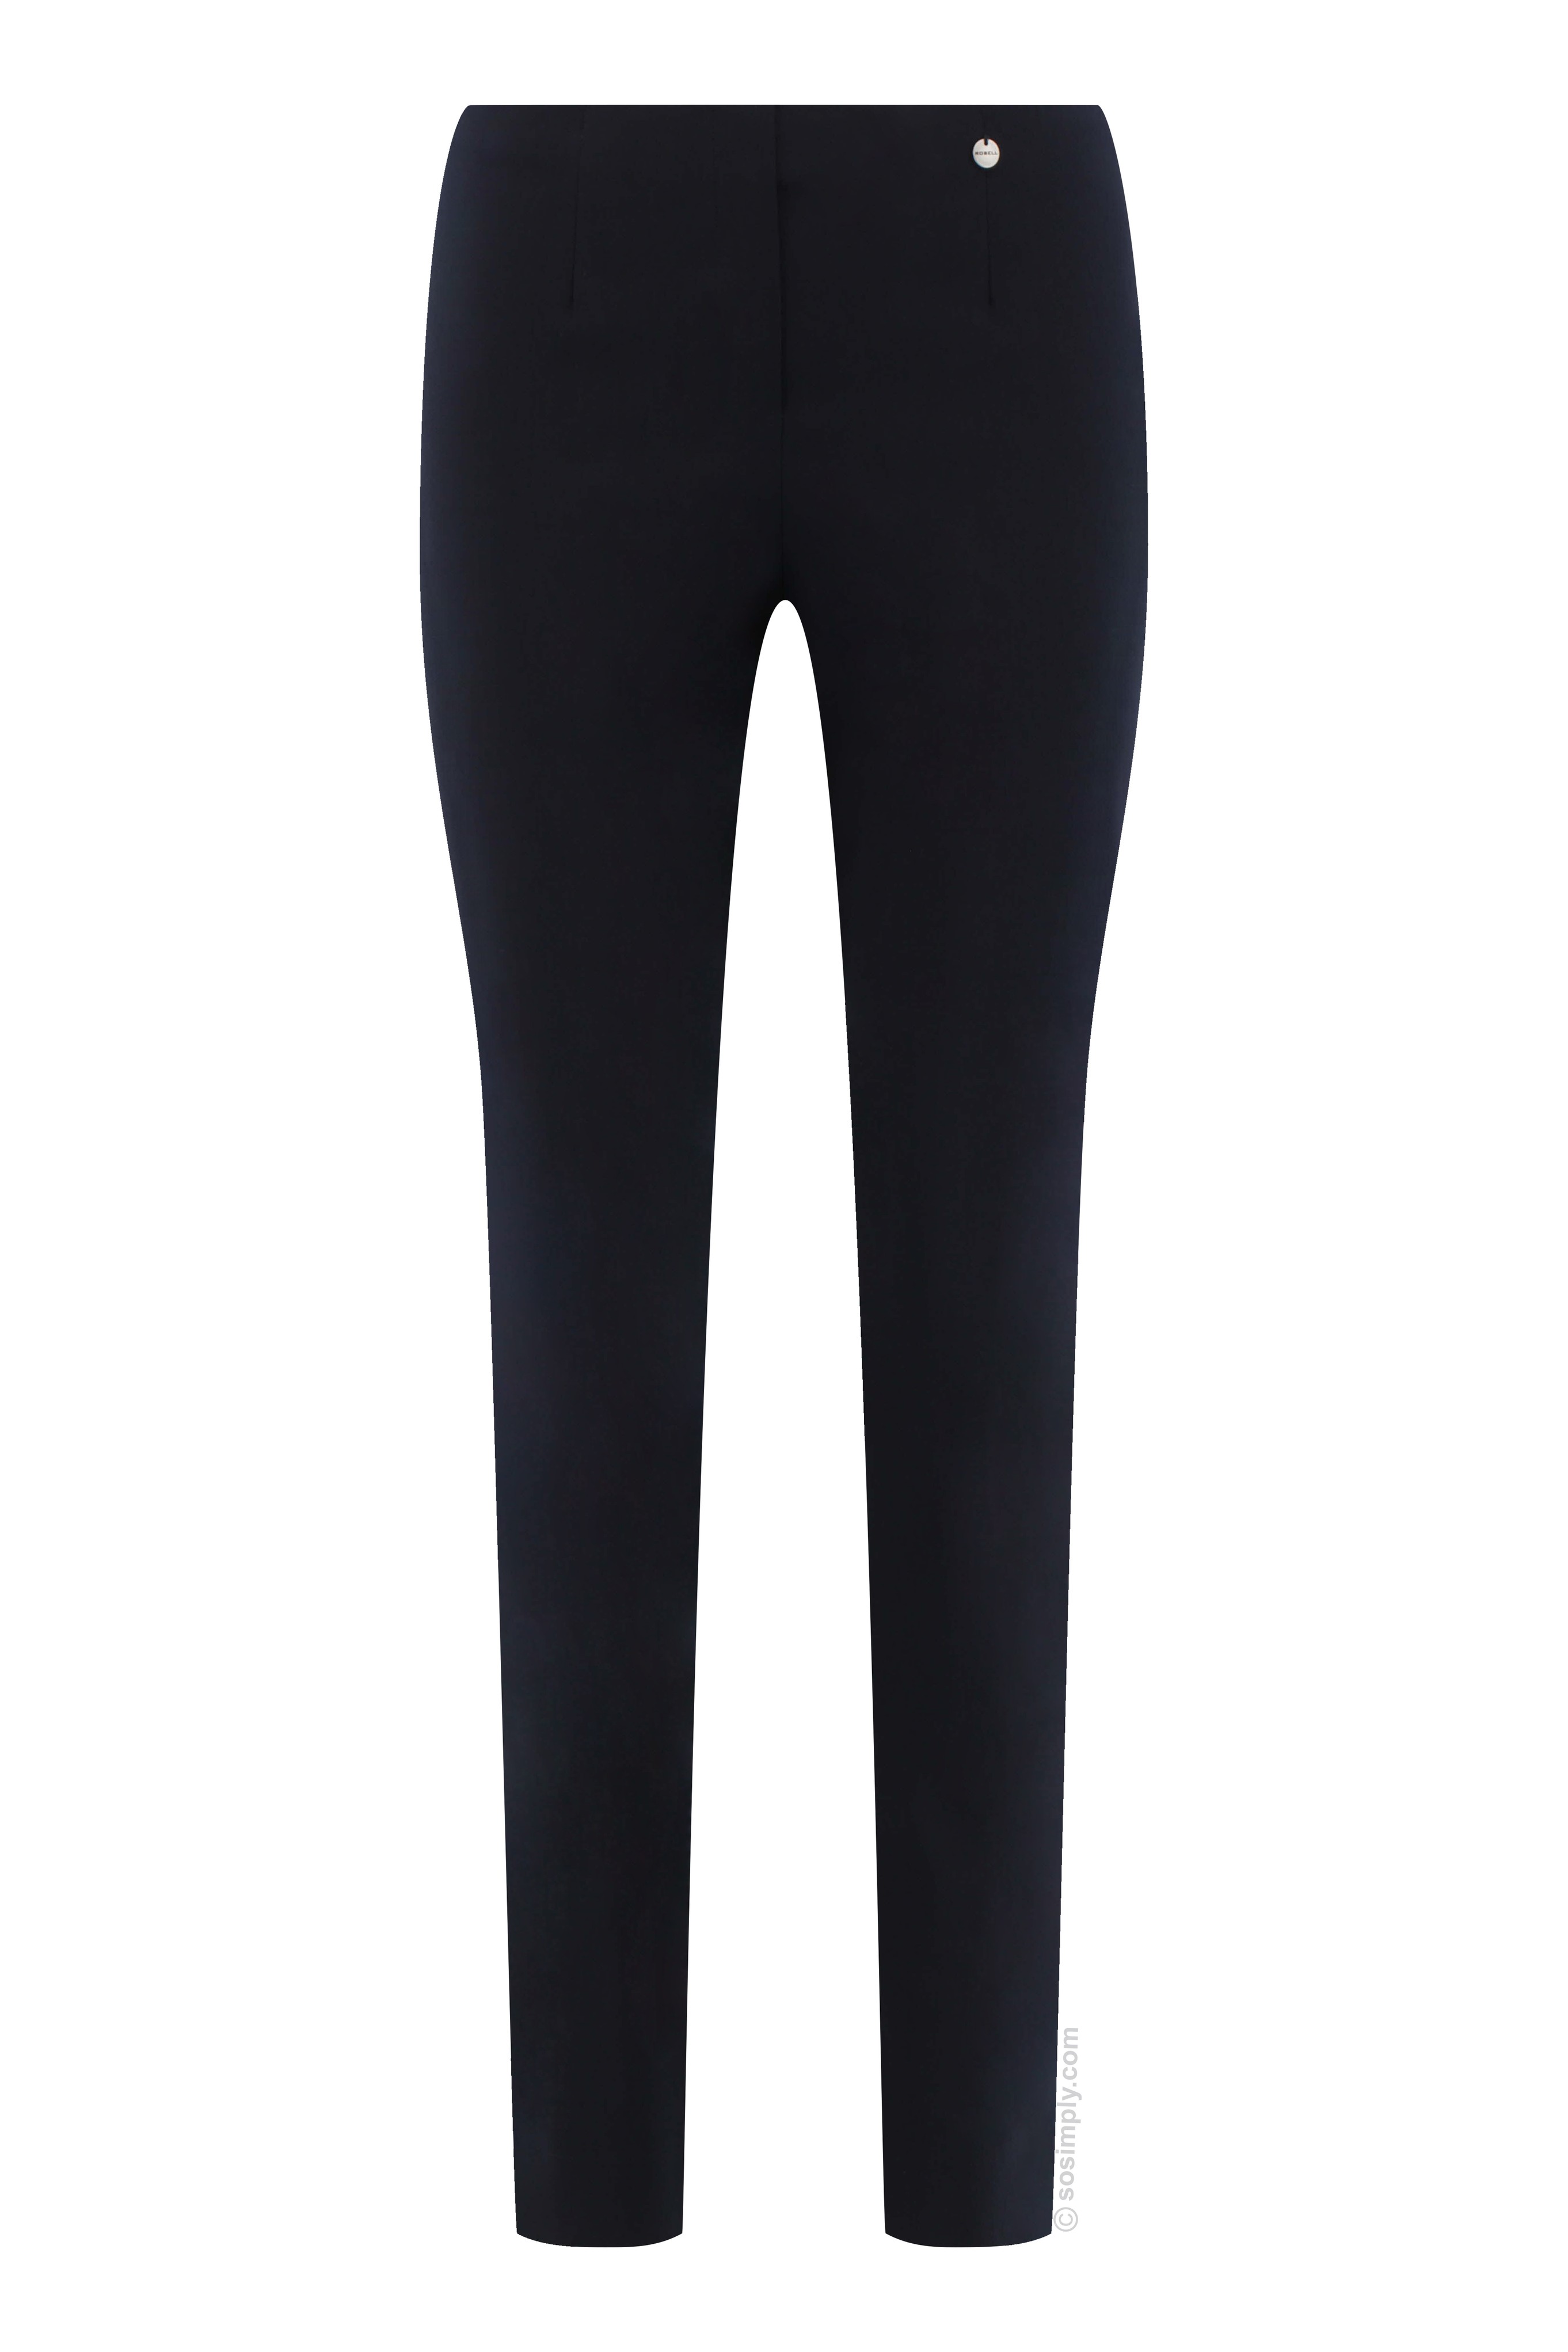 Robell Marie Petite Fleece Lined Trousers